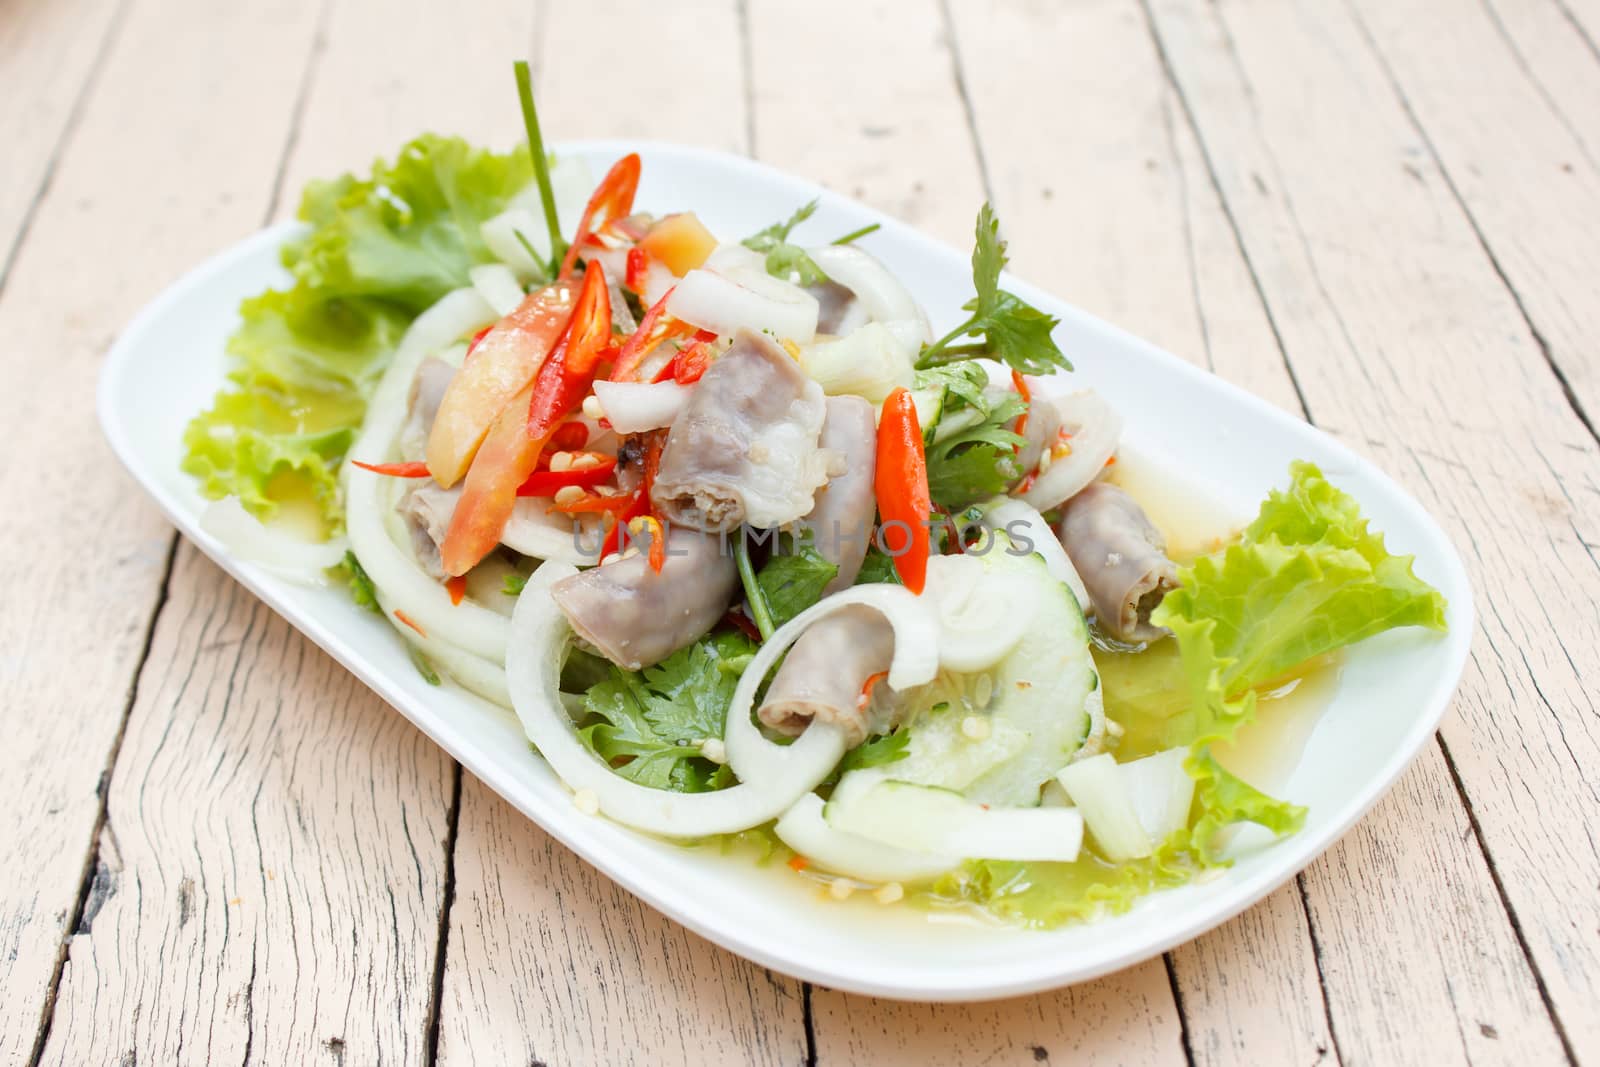 spicy intestines pork salad with vegetable by vitawin